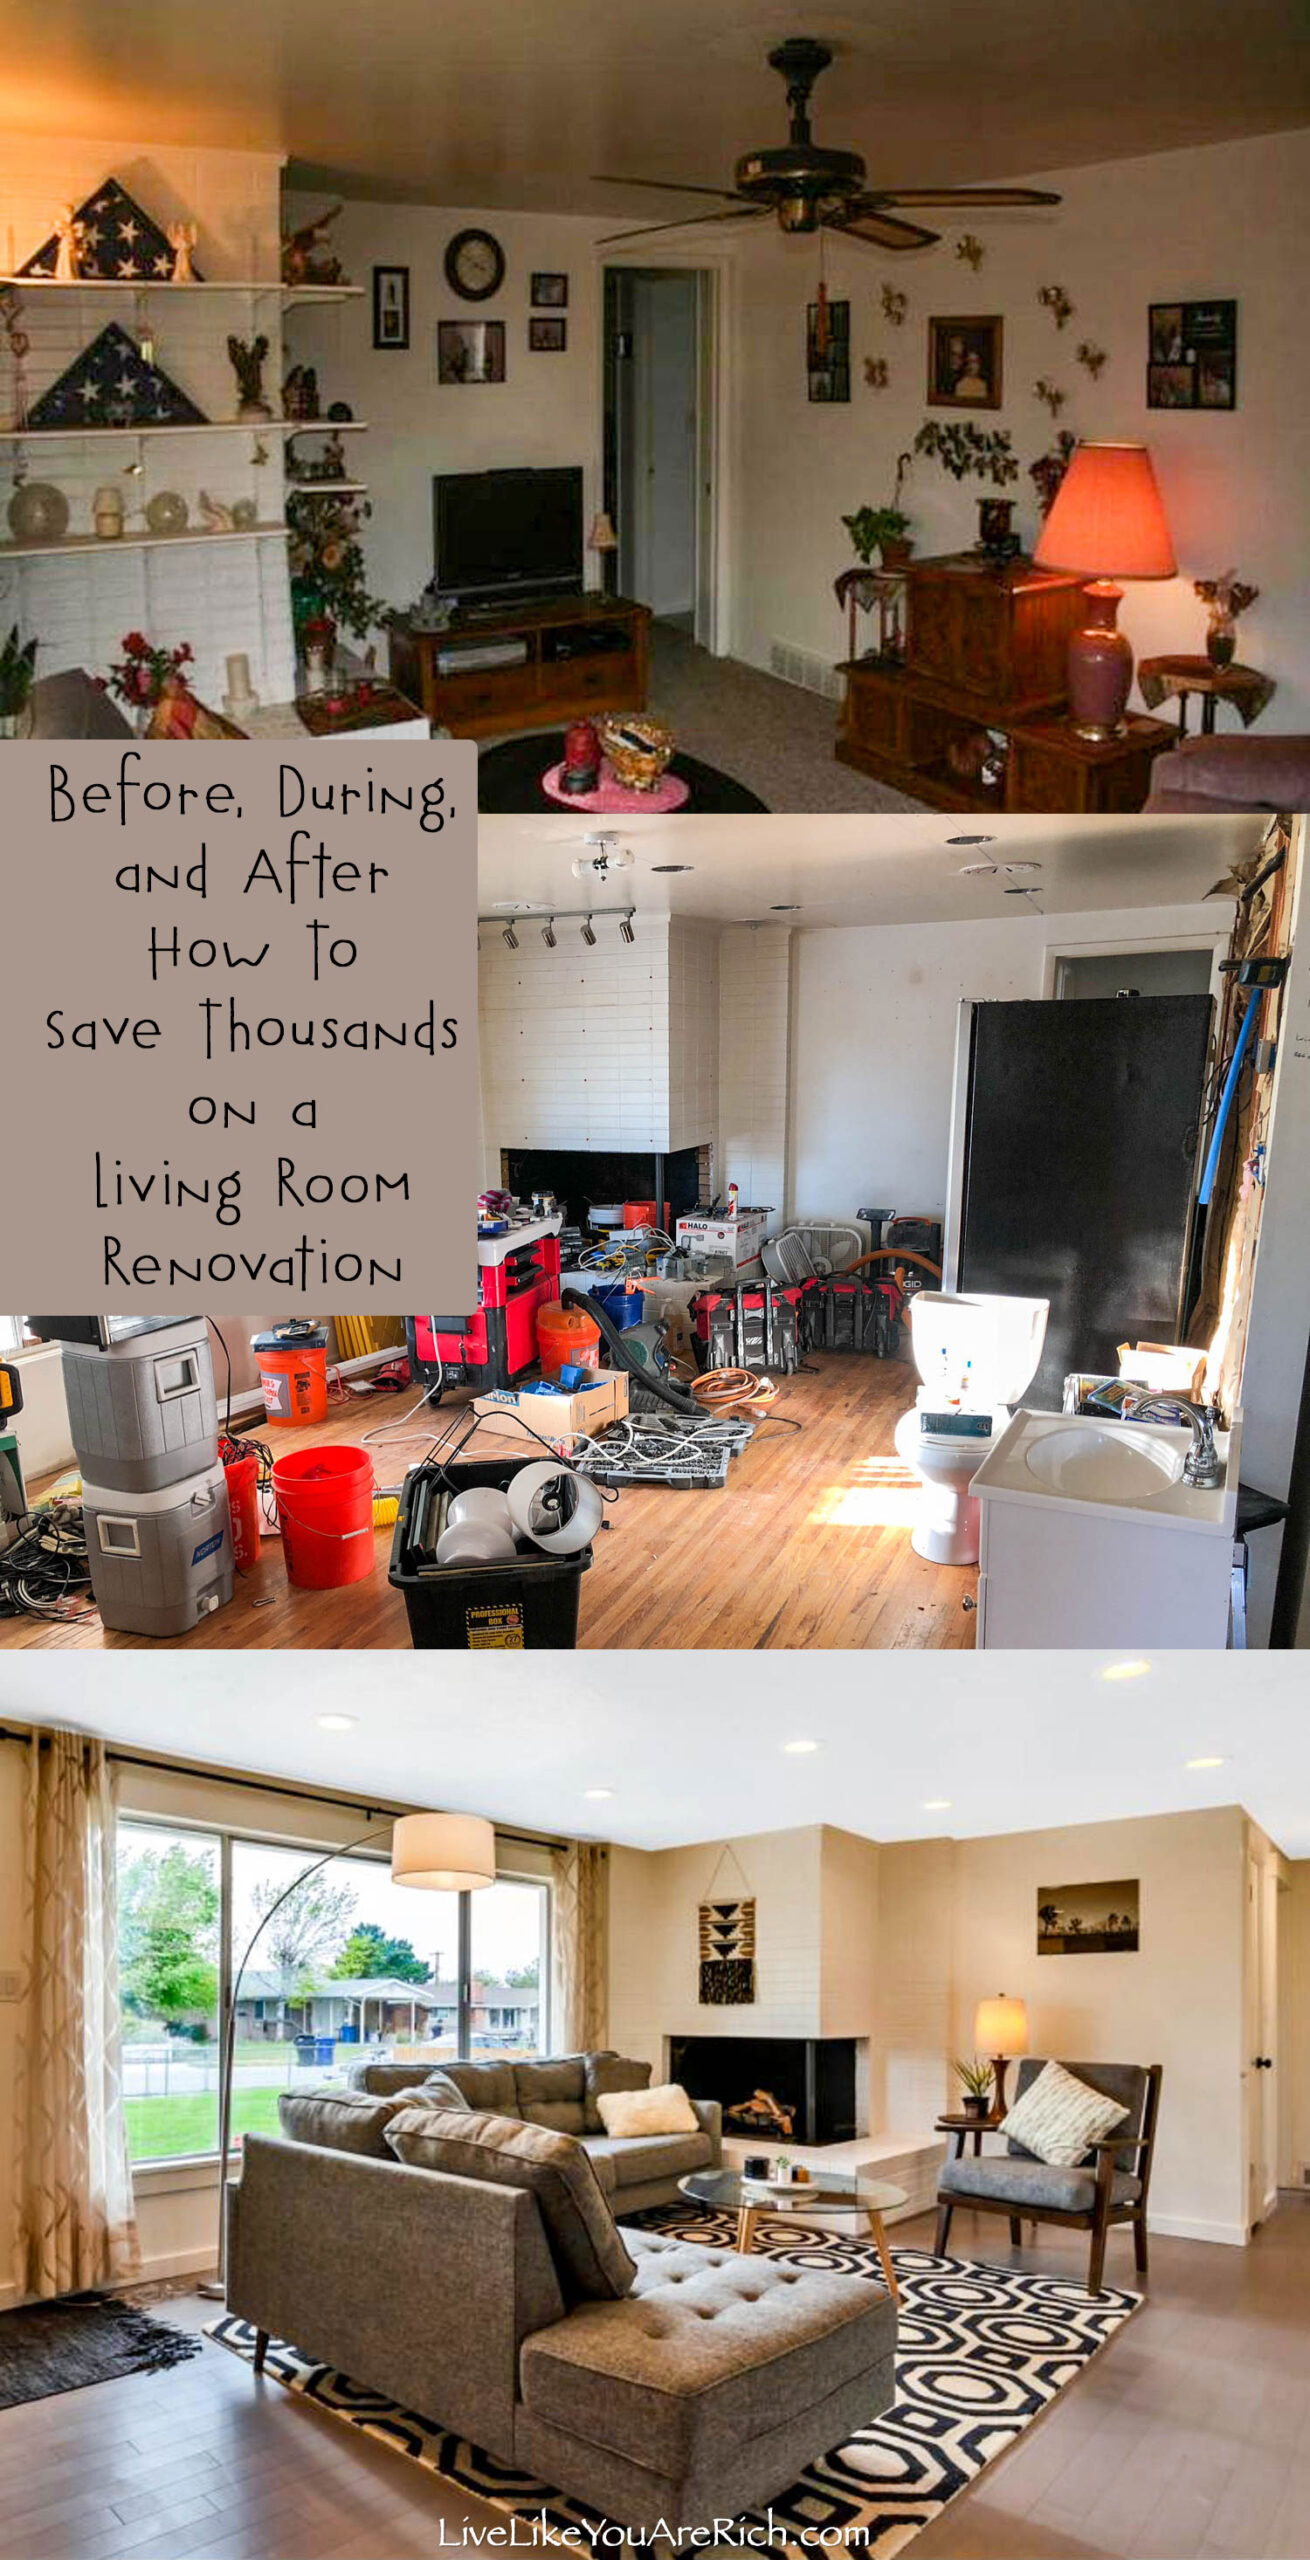 Before, during, and after the renovation